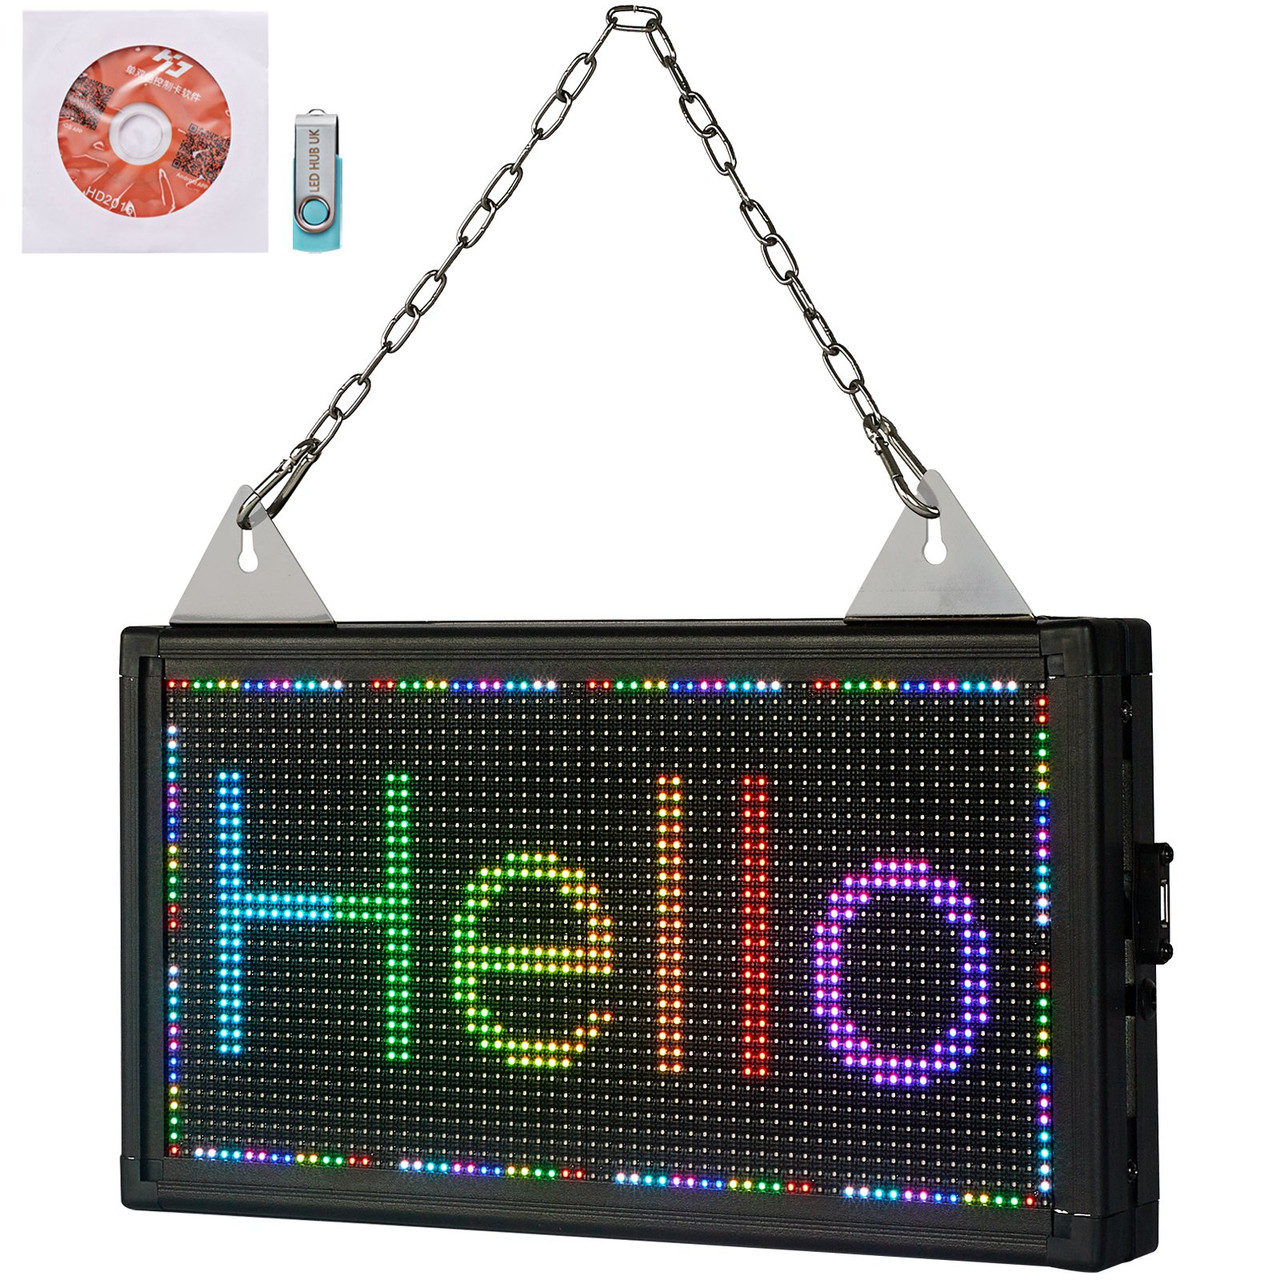 LED Scrolling Sign, 14" x 8" WiFi & USB Control, Full Color P5 Programmable Display, Indoor High Resolution Message Board, High Brightness Electronic